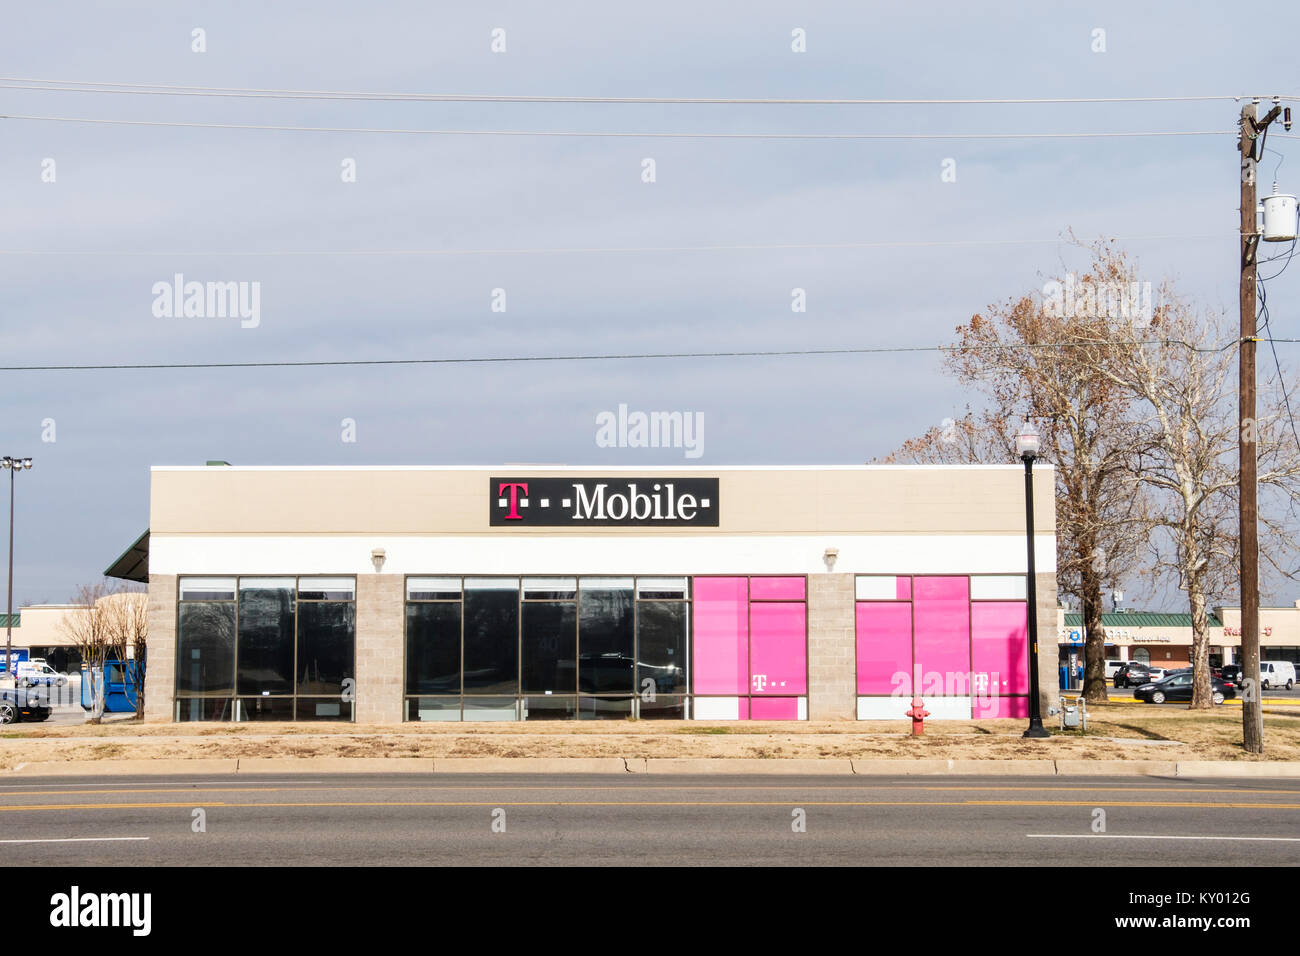 Exterior of a T Mobile shop offering mobile phones and cellular plans. Oklahoma City, Oklahoma, USA. Stock Photo